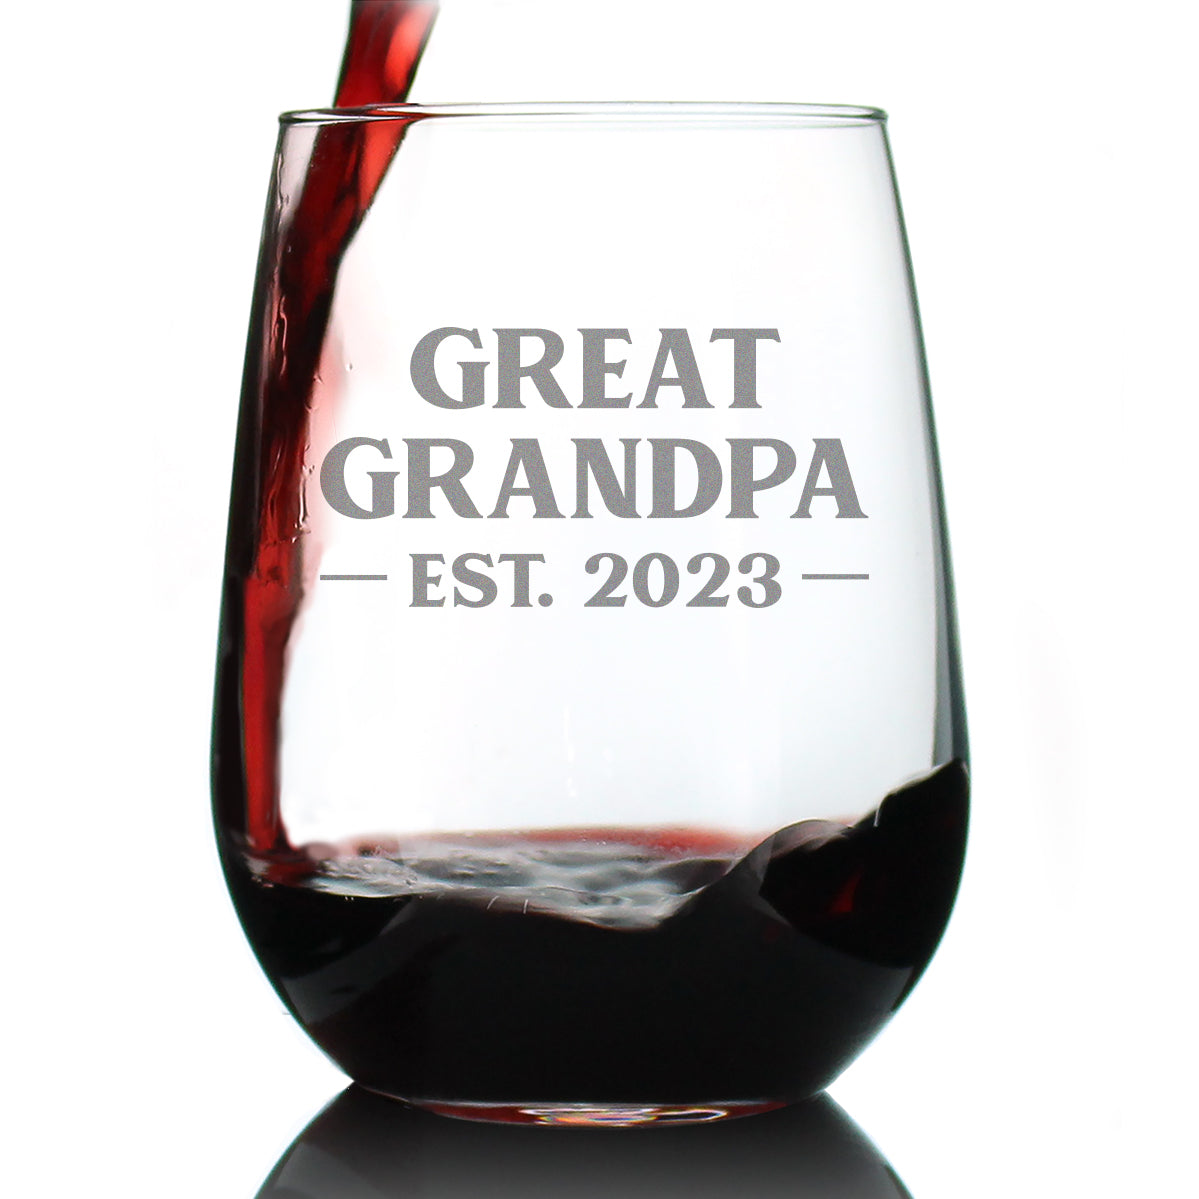 Great Grandpa Est 2023 - New Great Grandfather Stemless Wine Glass Gift for First Time Great Grandparents - Bold 17 Oz Large Glasses